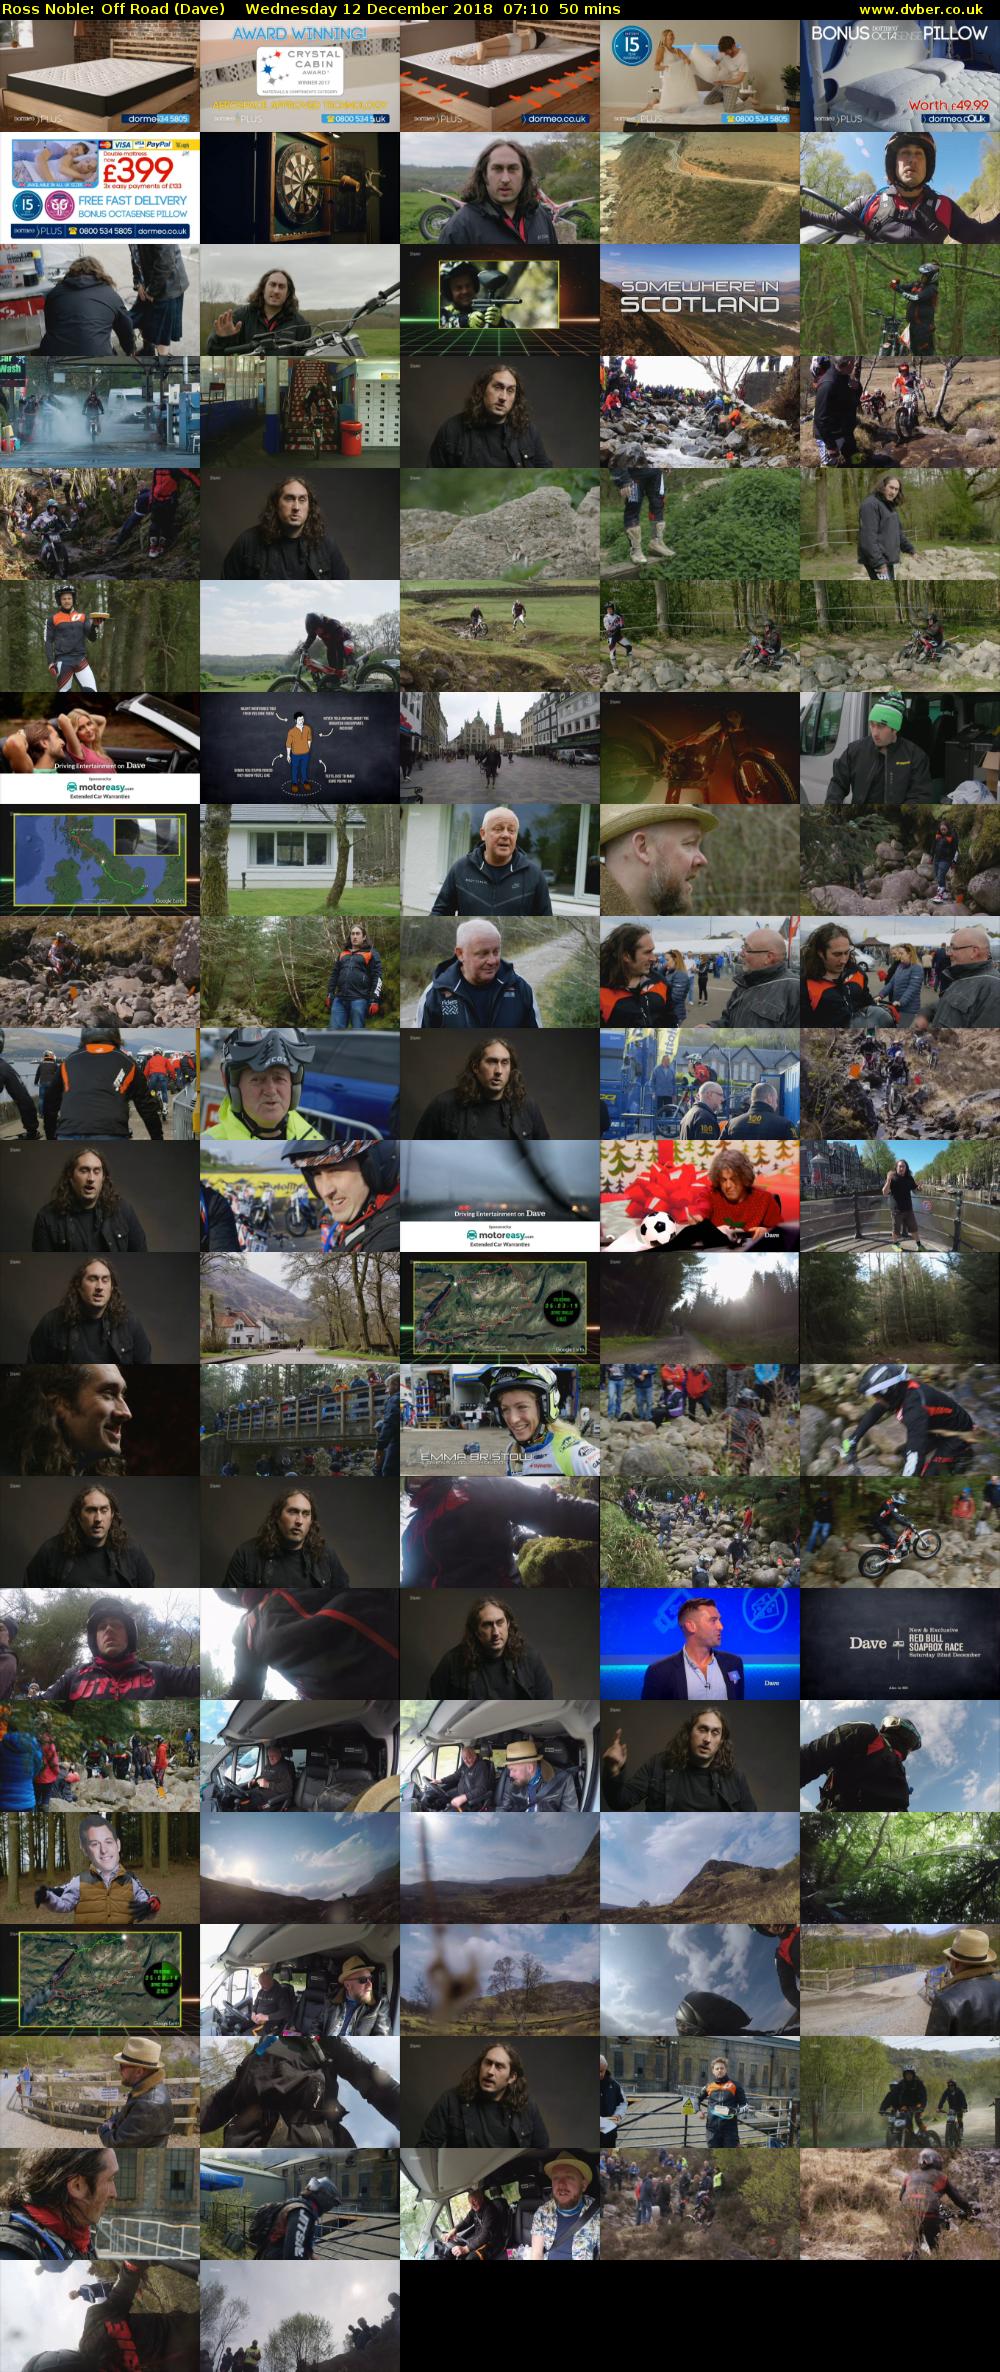 Ross Noble: Off Road (Dave) Wednesday 12 December 2018 07:10 - 08:00